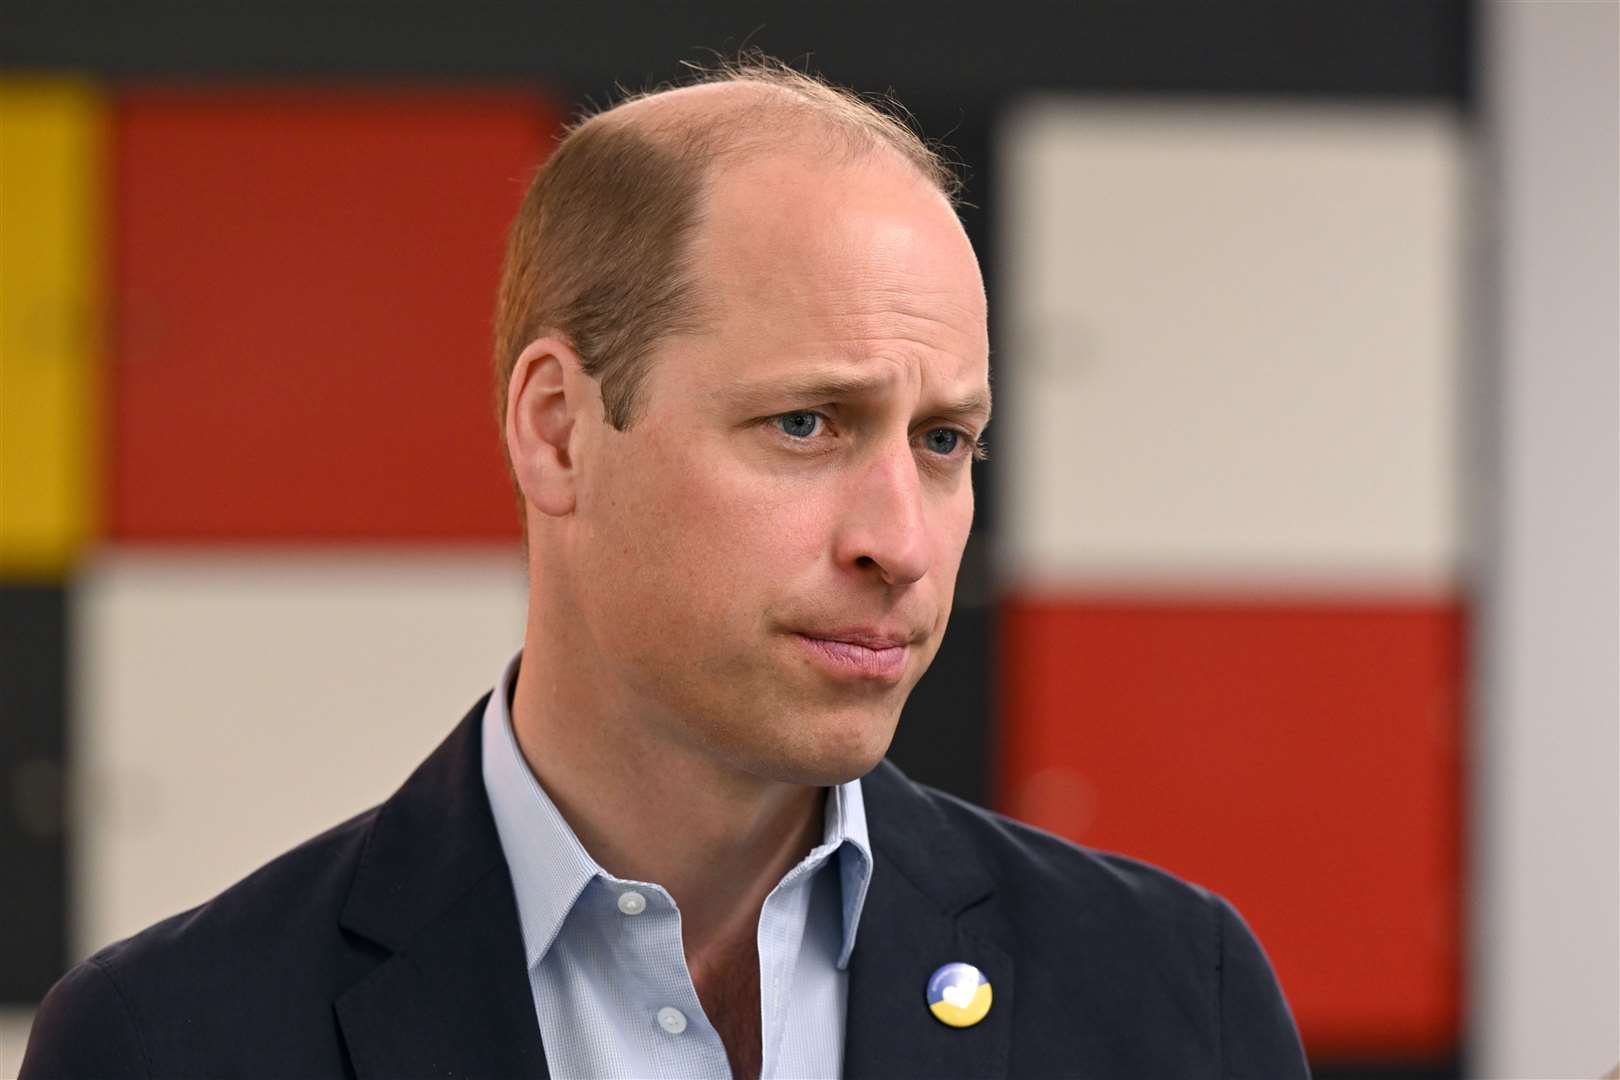 The Duke of Cambridge has been designated to open the new parliamentary session (Jeff Spicer/PA)